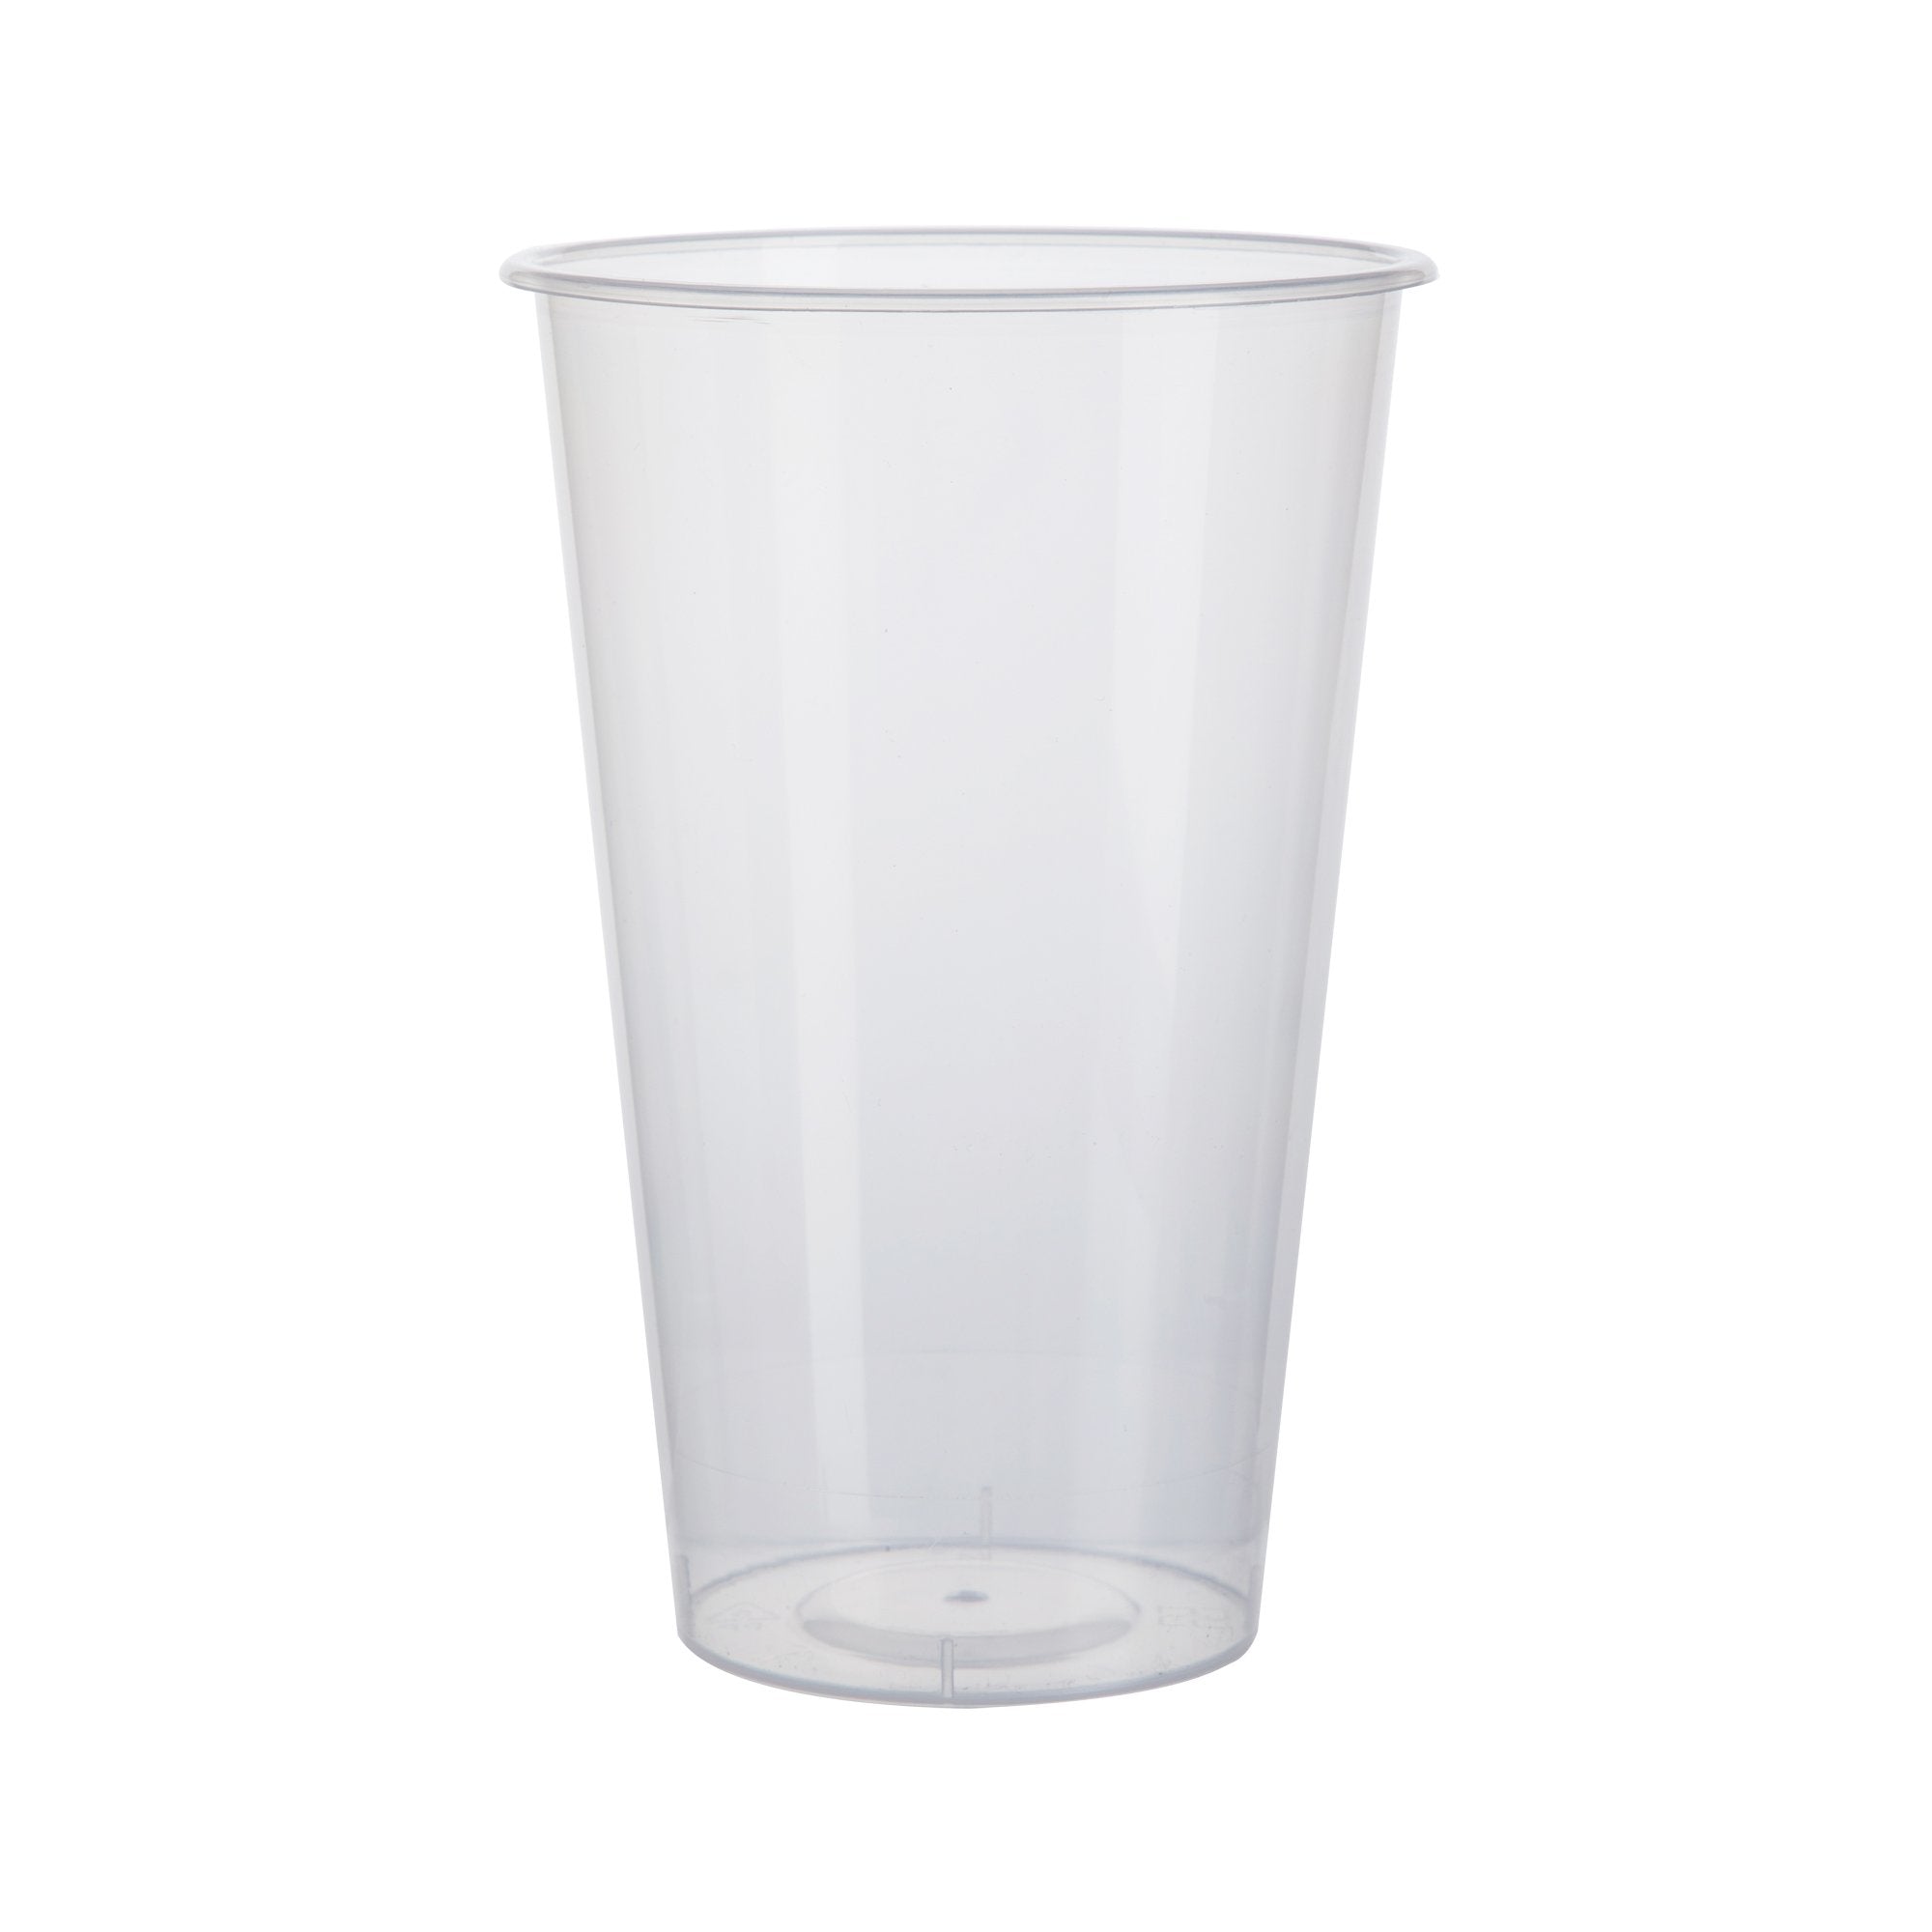 PREMIUM INJECTION PP CUP 16 OZ- CLEAR (1000/CASE)